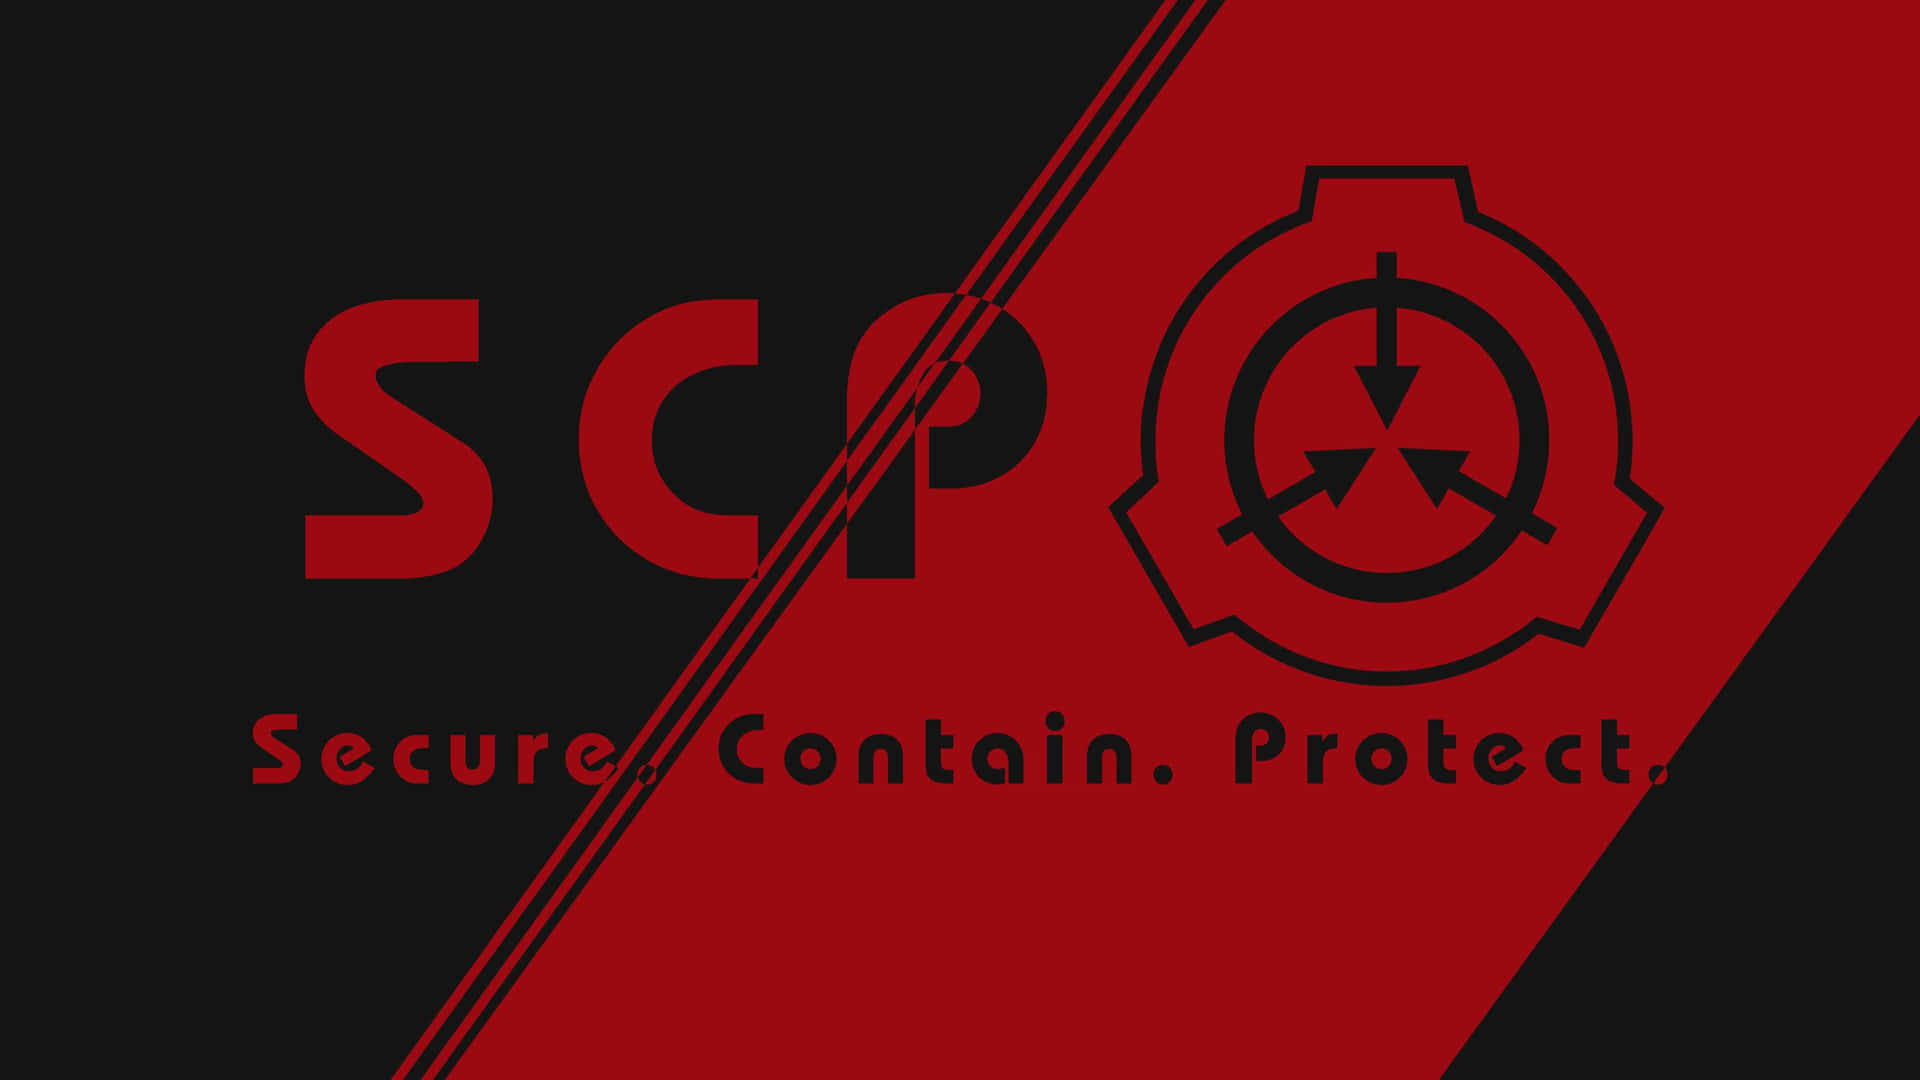 scp overlord wallpaper